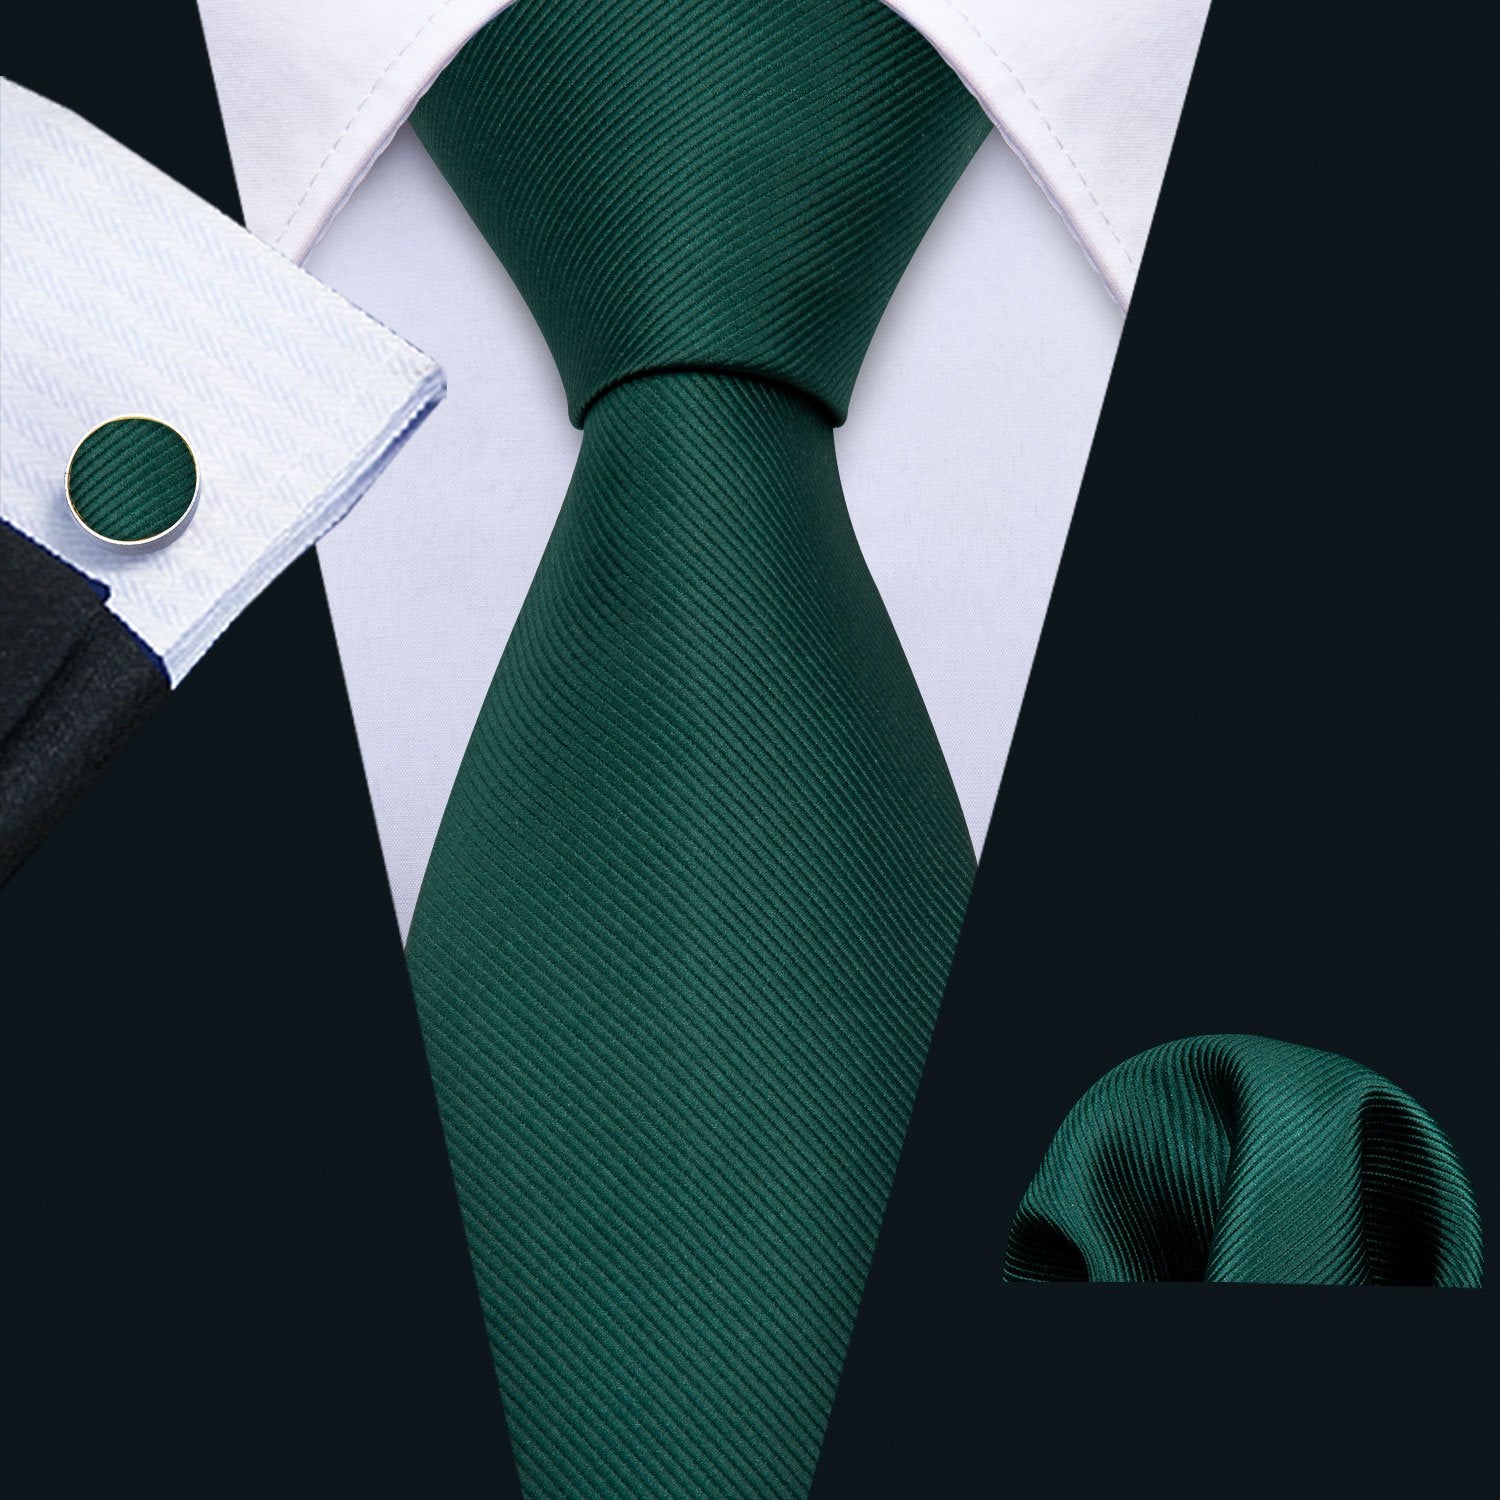 Formal Green Solid Tie Pocket Square Cufflinks Set 8.5cm Fashion Designer Neckties with Brooches Easy Matching